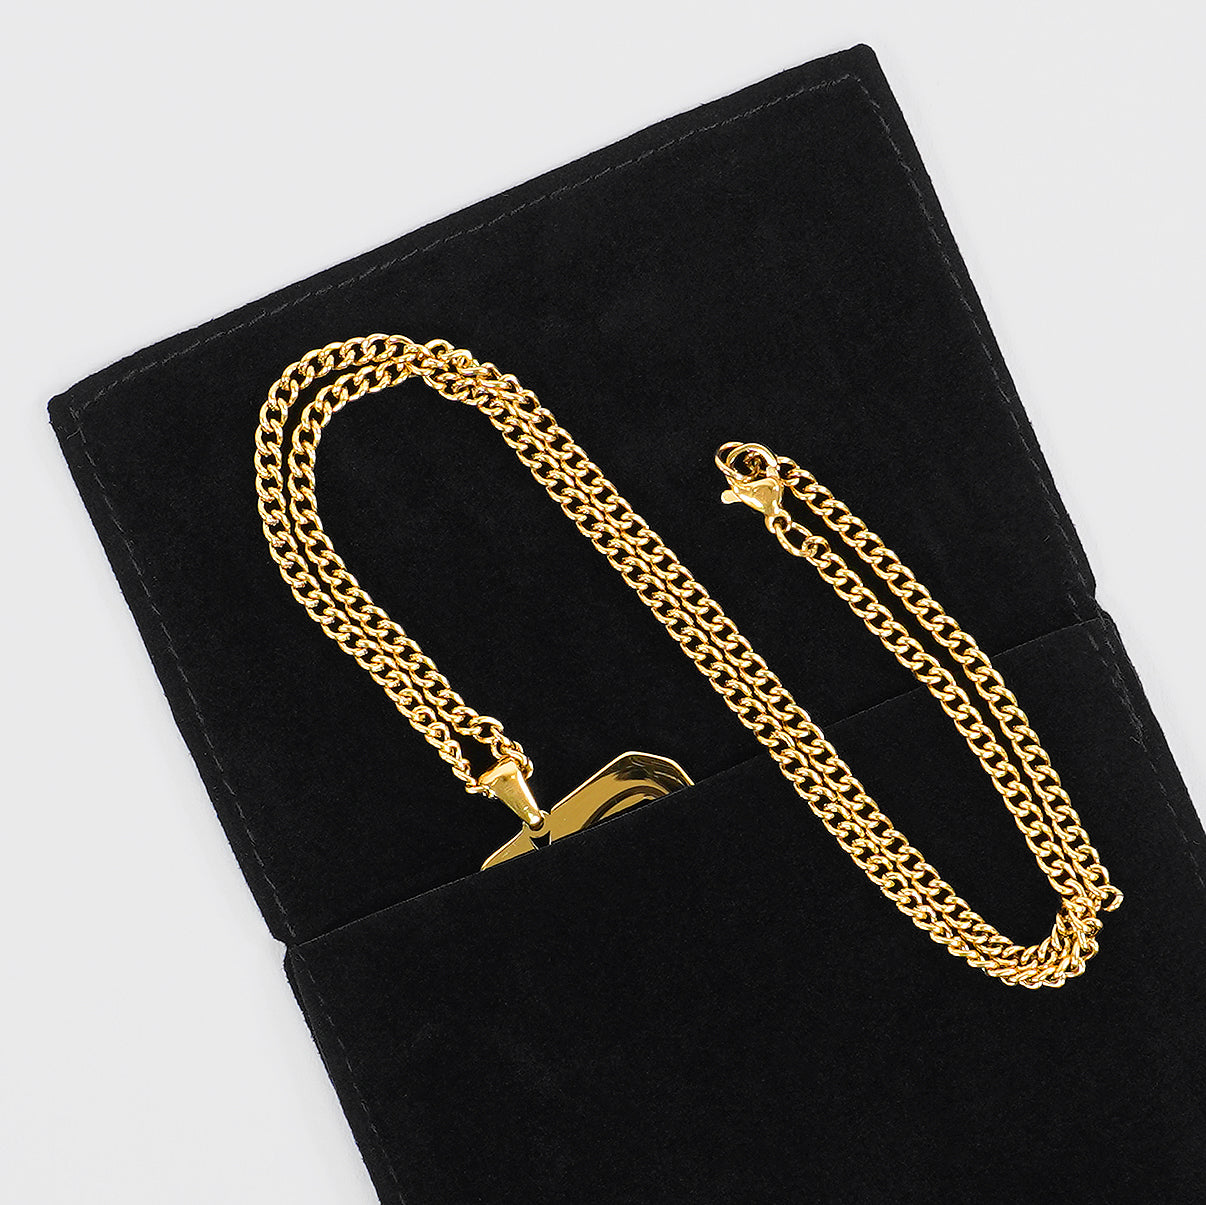 60 Number Pendant with Chain Necklace - Gold Plated Stainless Steel